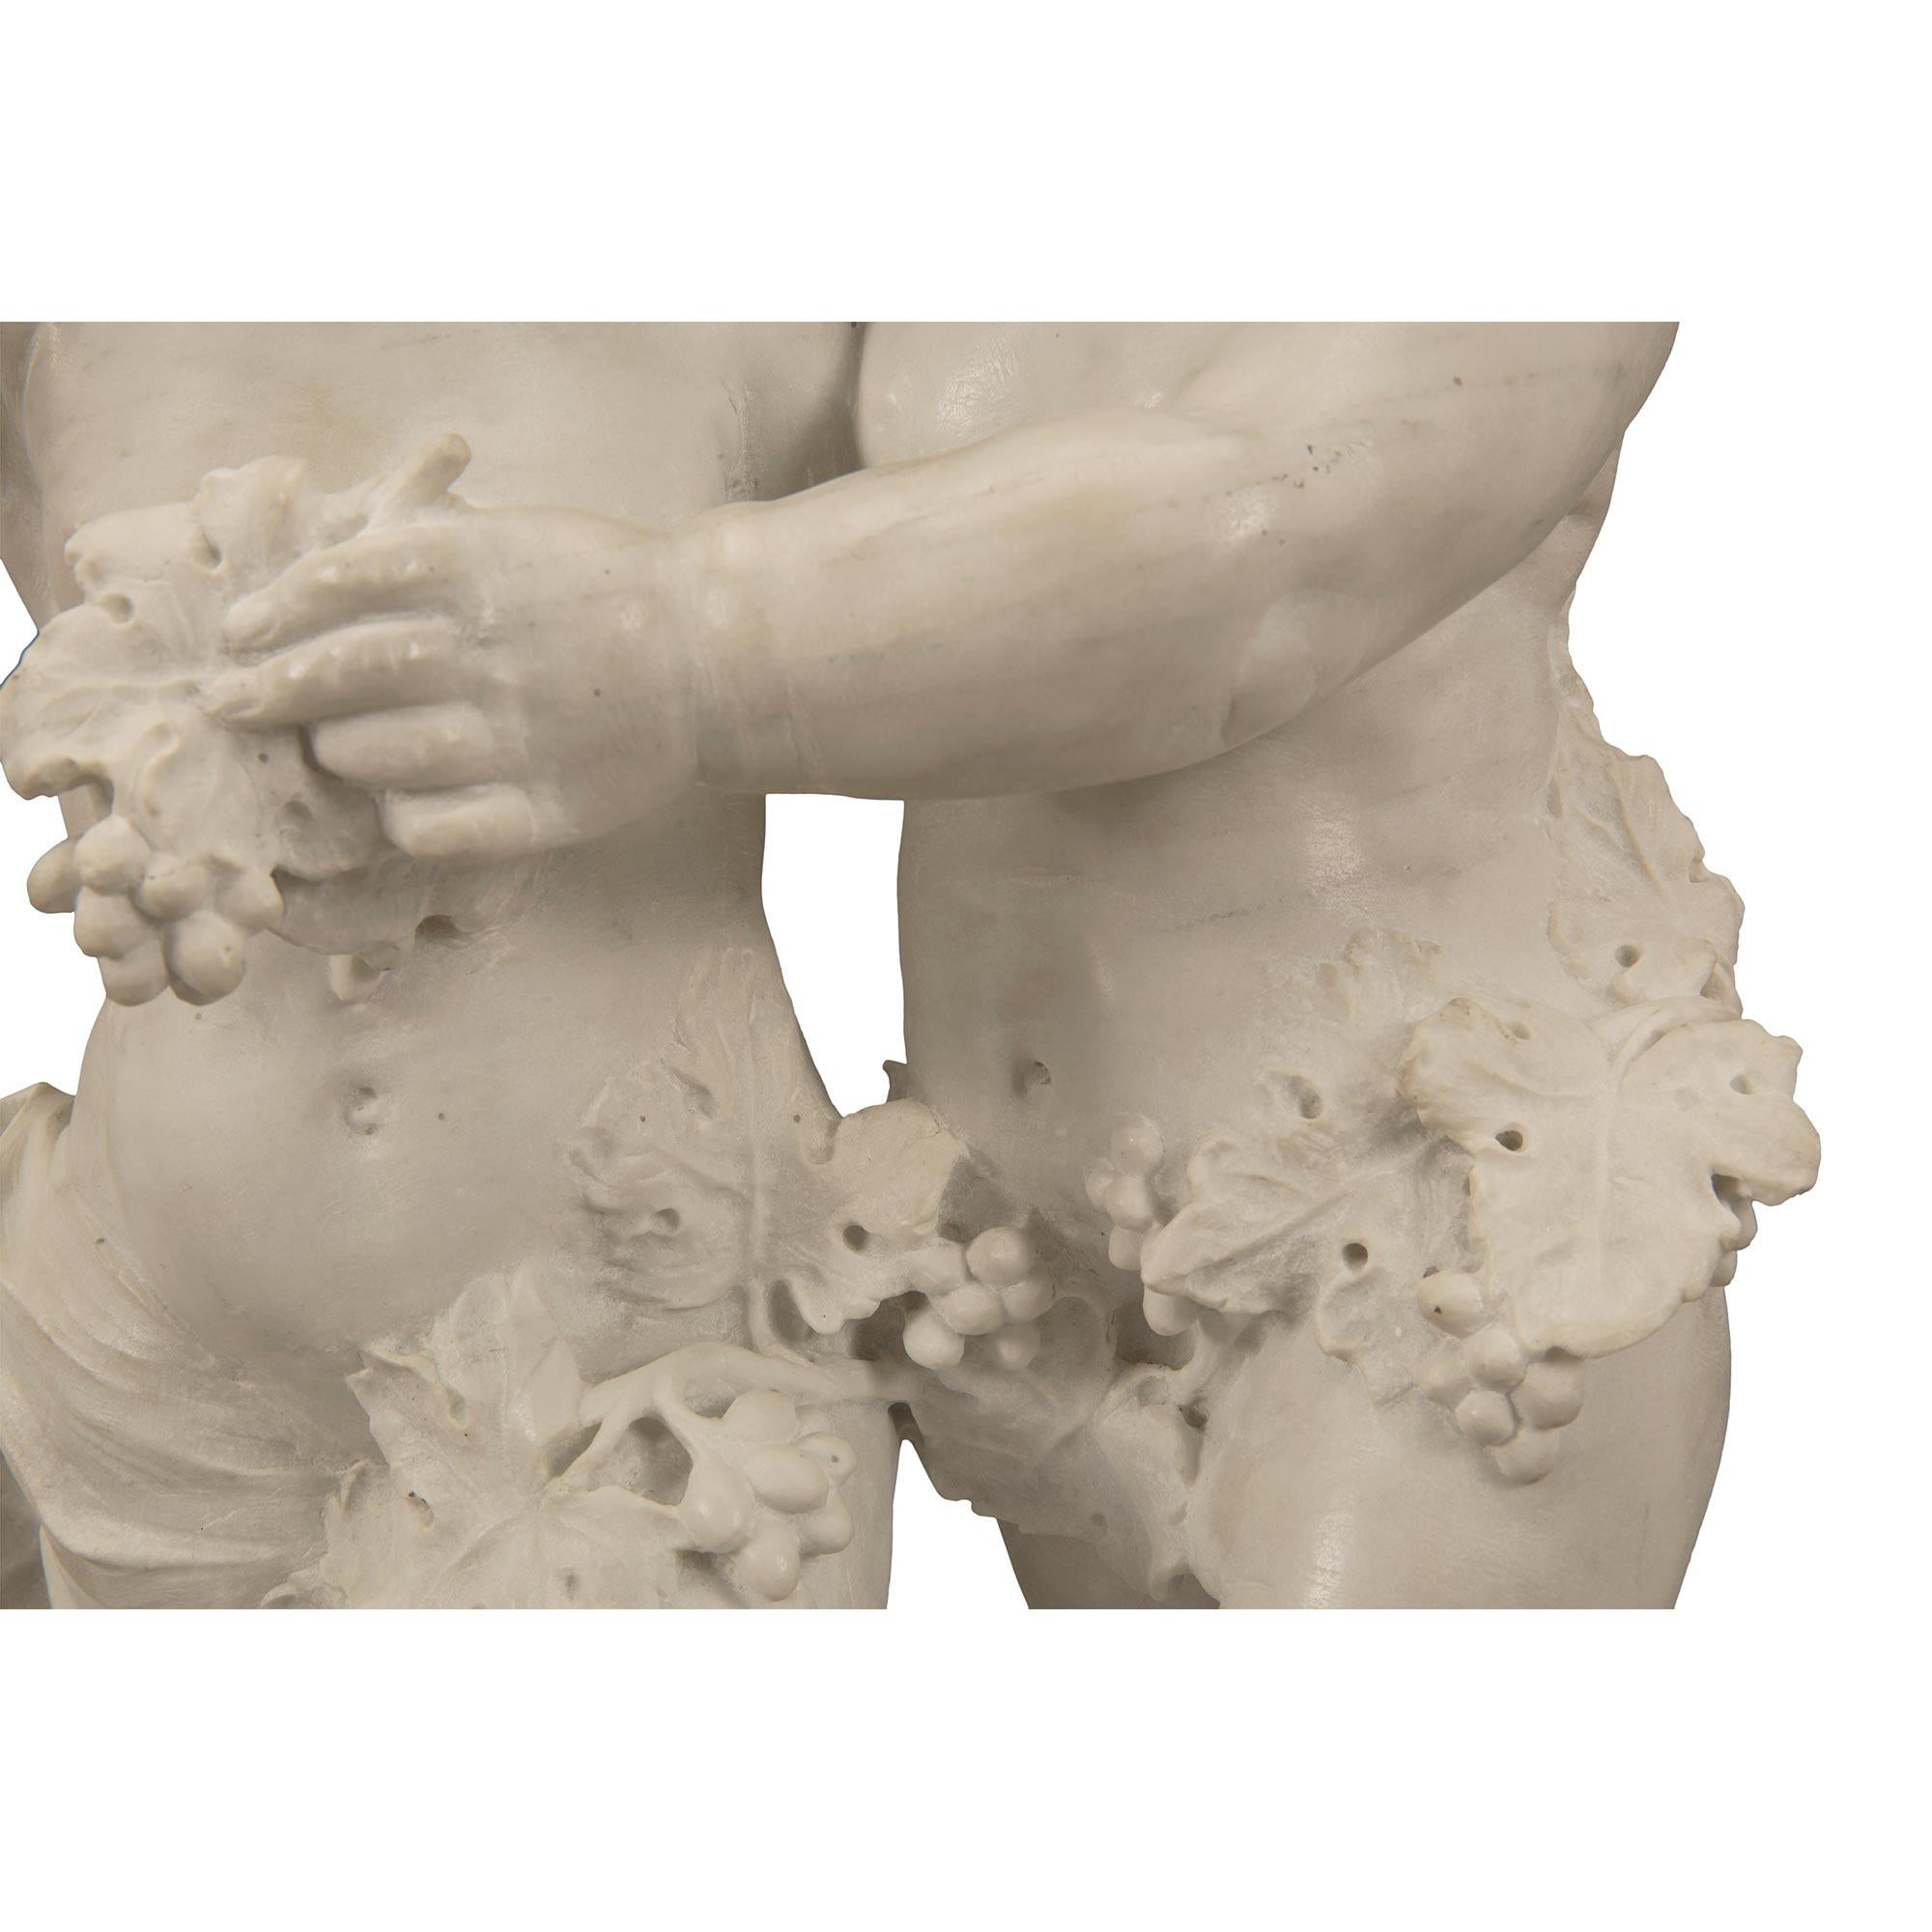 Italian 19th Century White Carrara Marble Statue of Two Children Playing For Sale 5